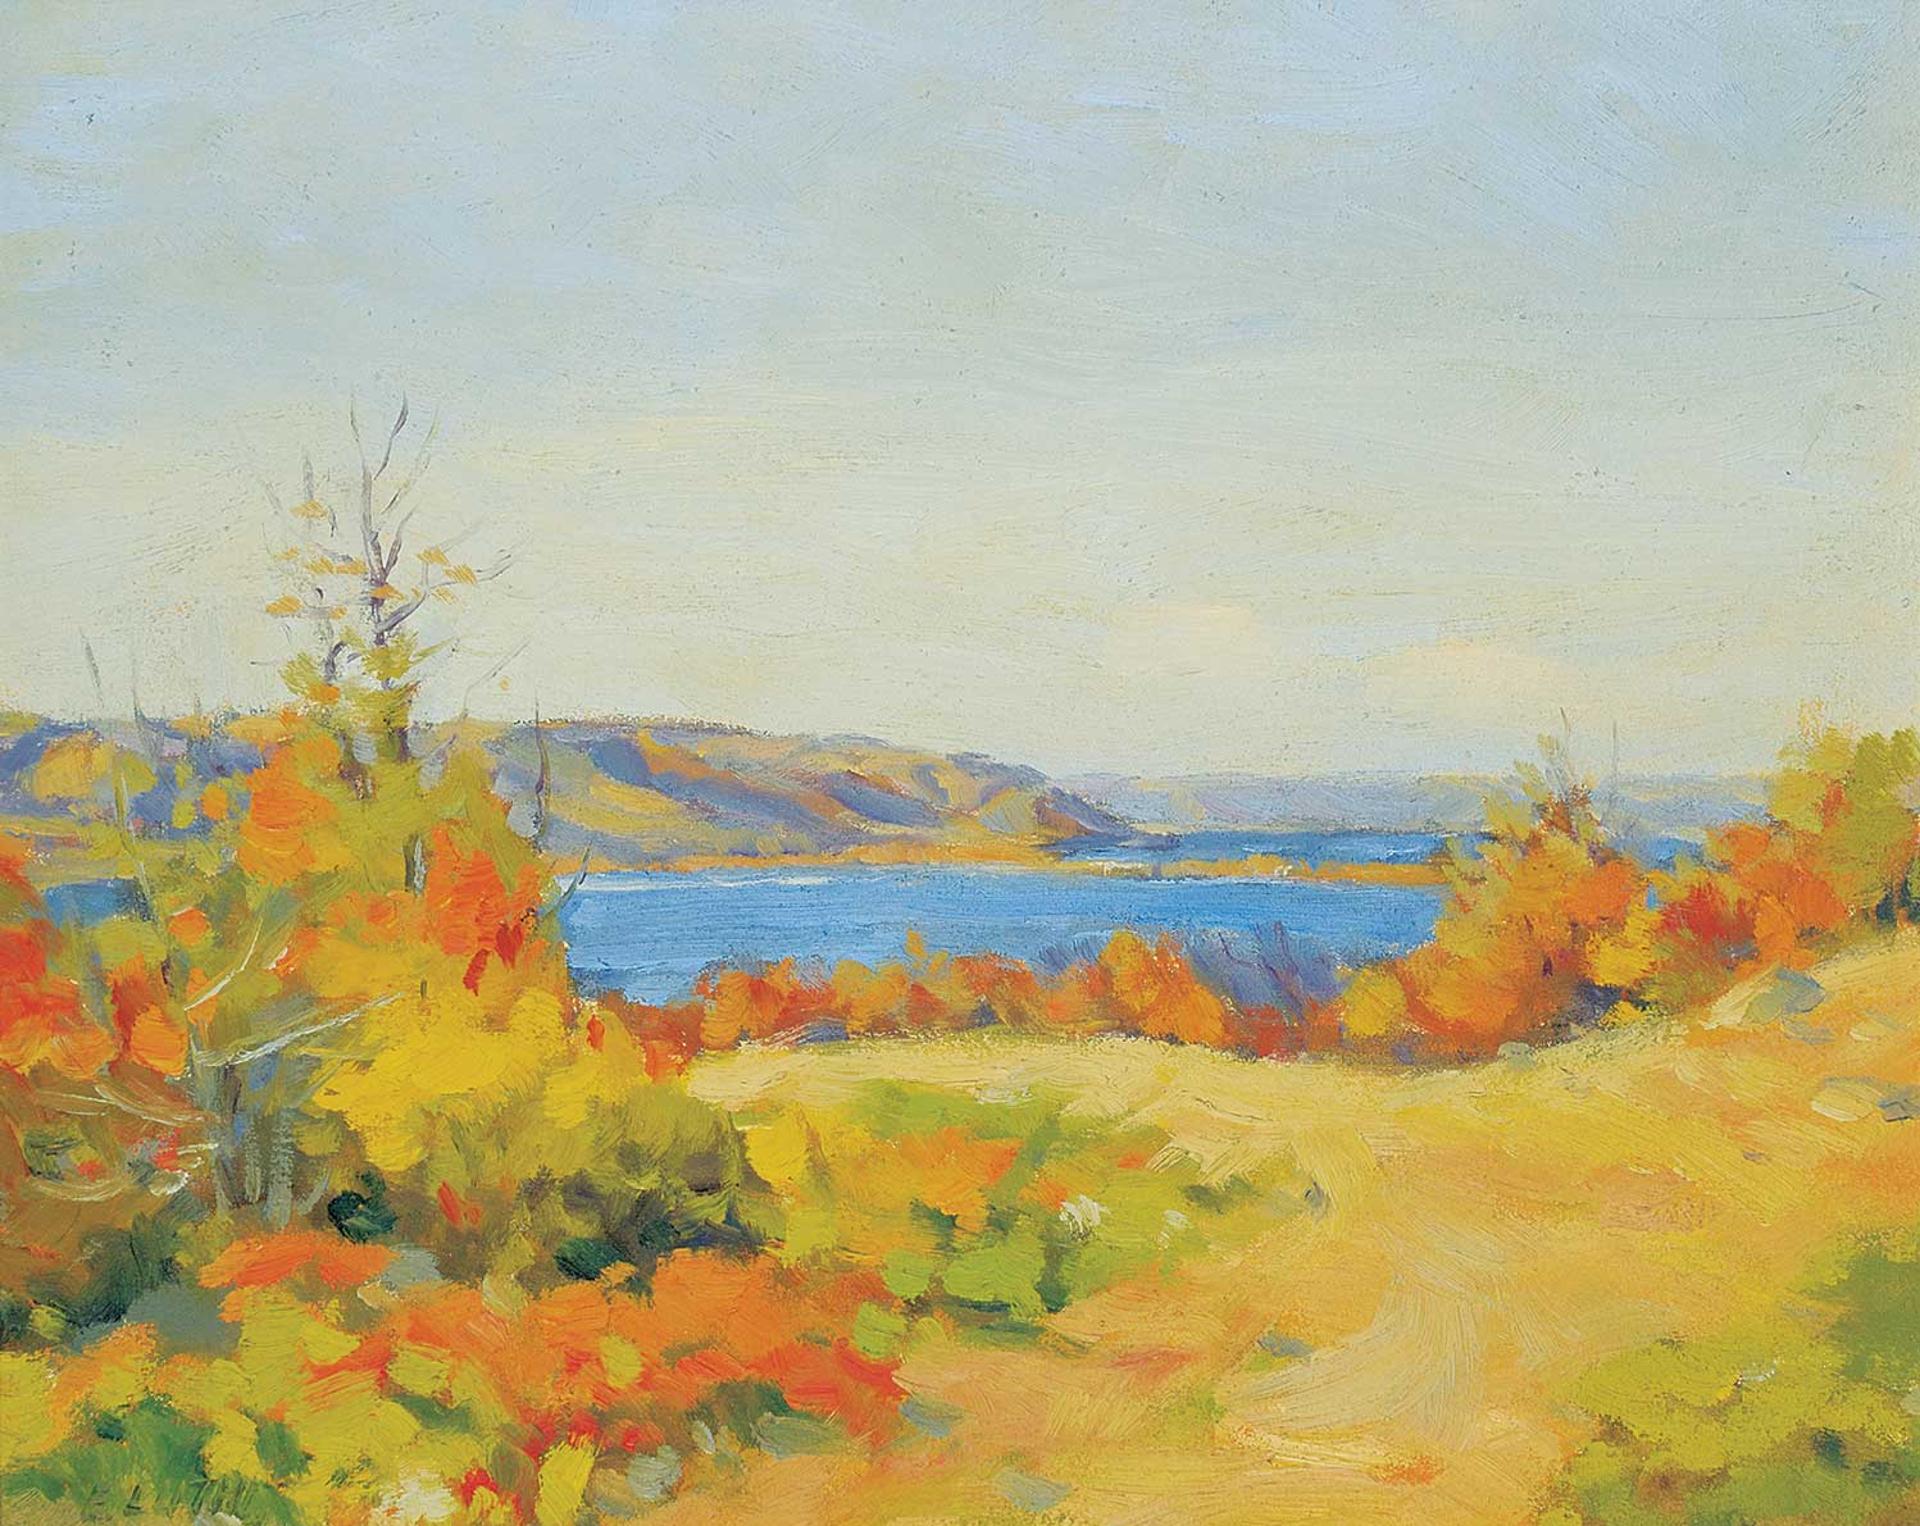 Ernest (Ernie) Luthi (1906-1983) - A September Day Along N. Side of Echo Lake Looking Towards the Sioux